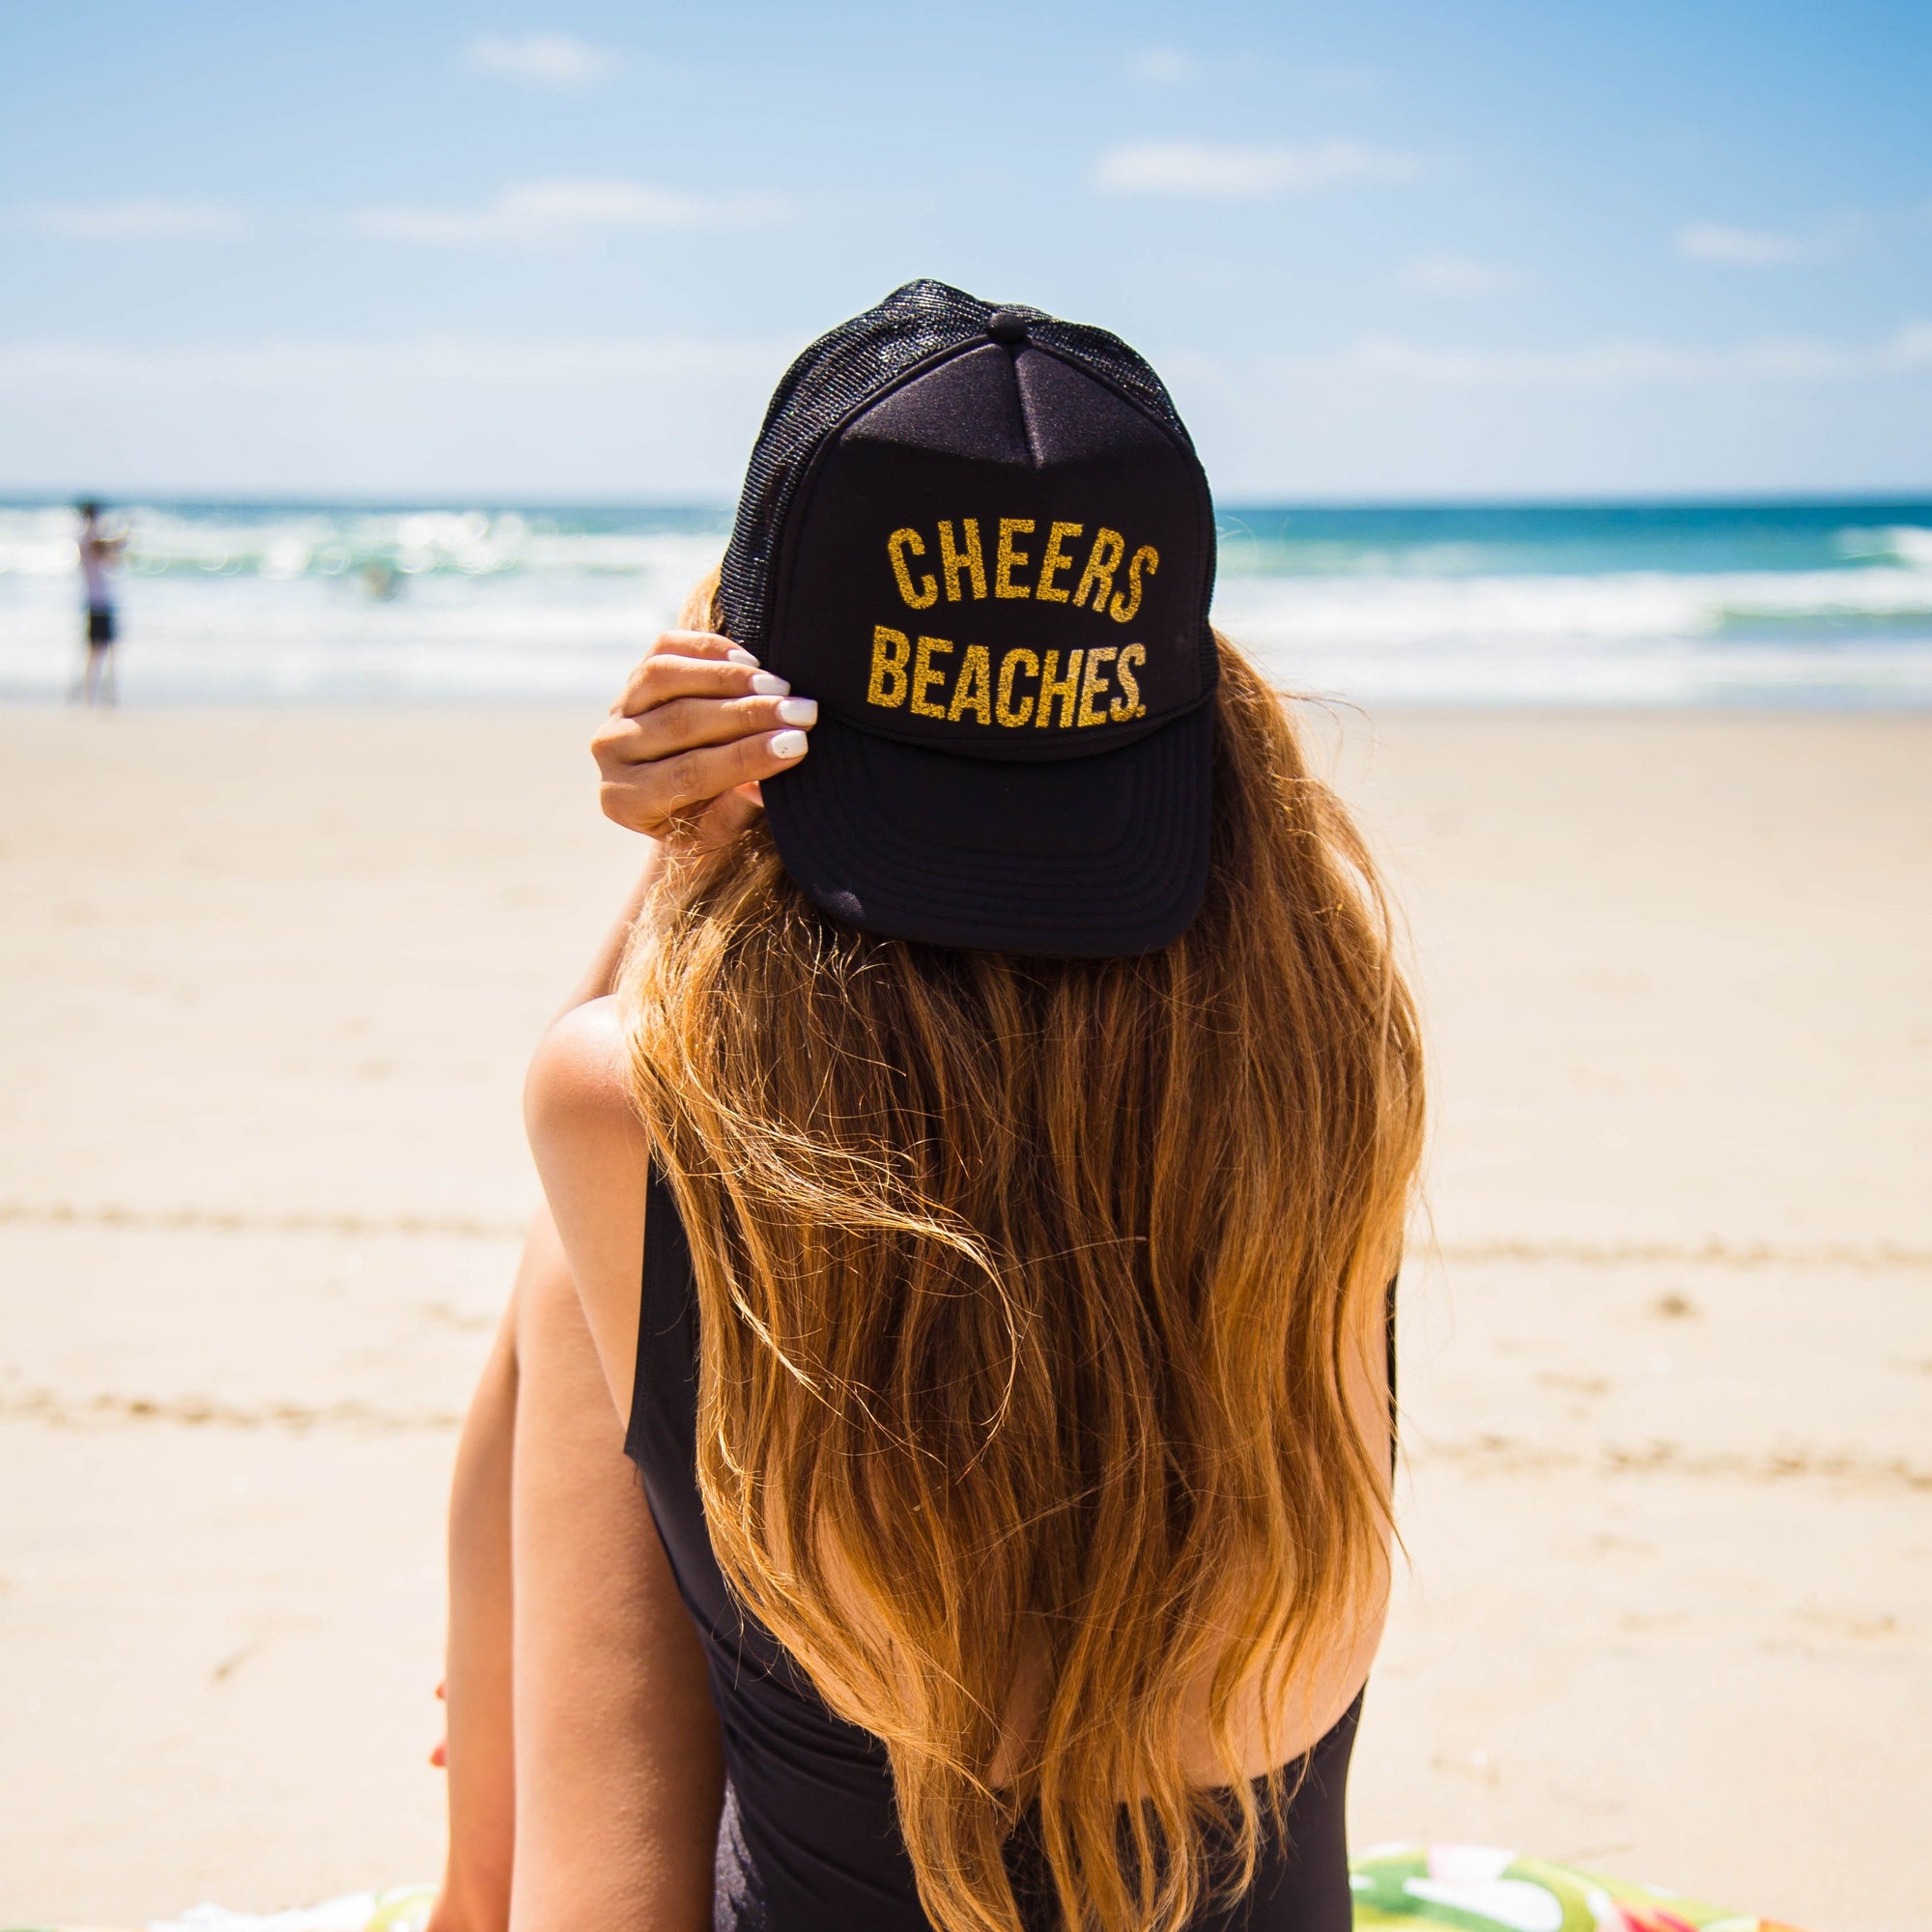 Cheers Beaches Accessories Black and Gold "Cheers Beaches" Trucker Hat: Black & Glitter Gold